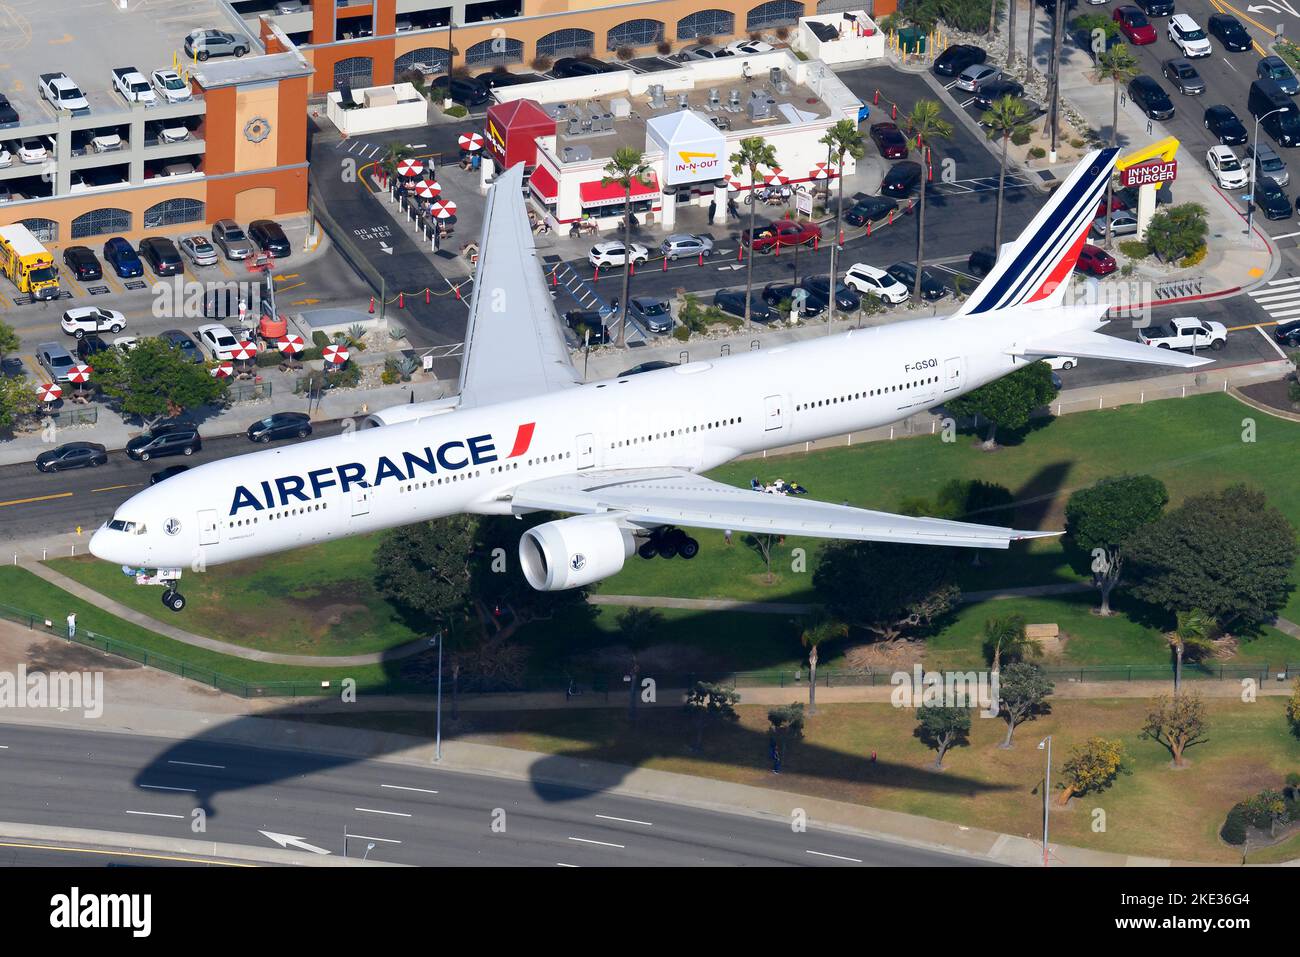 Air France Boeing 77W plane from above. Airplane of french airline and 777-300ER model. Air France 777 aircraft registered as F-GSQI. Stock Photo